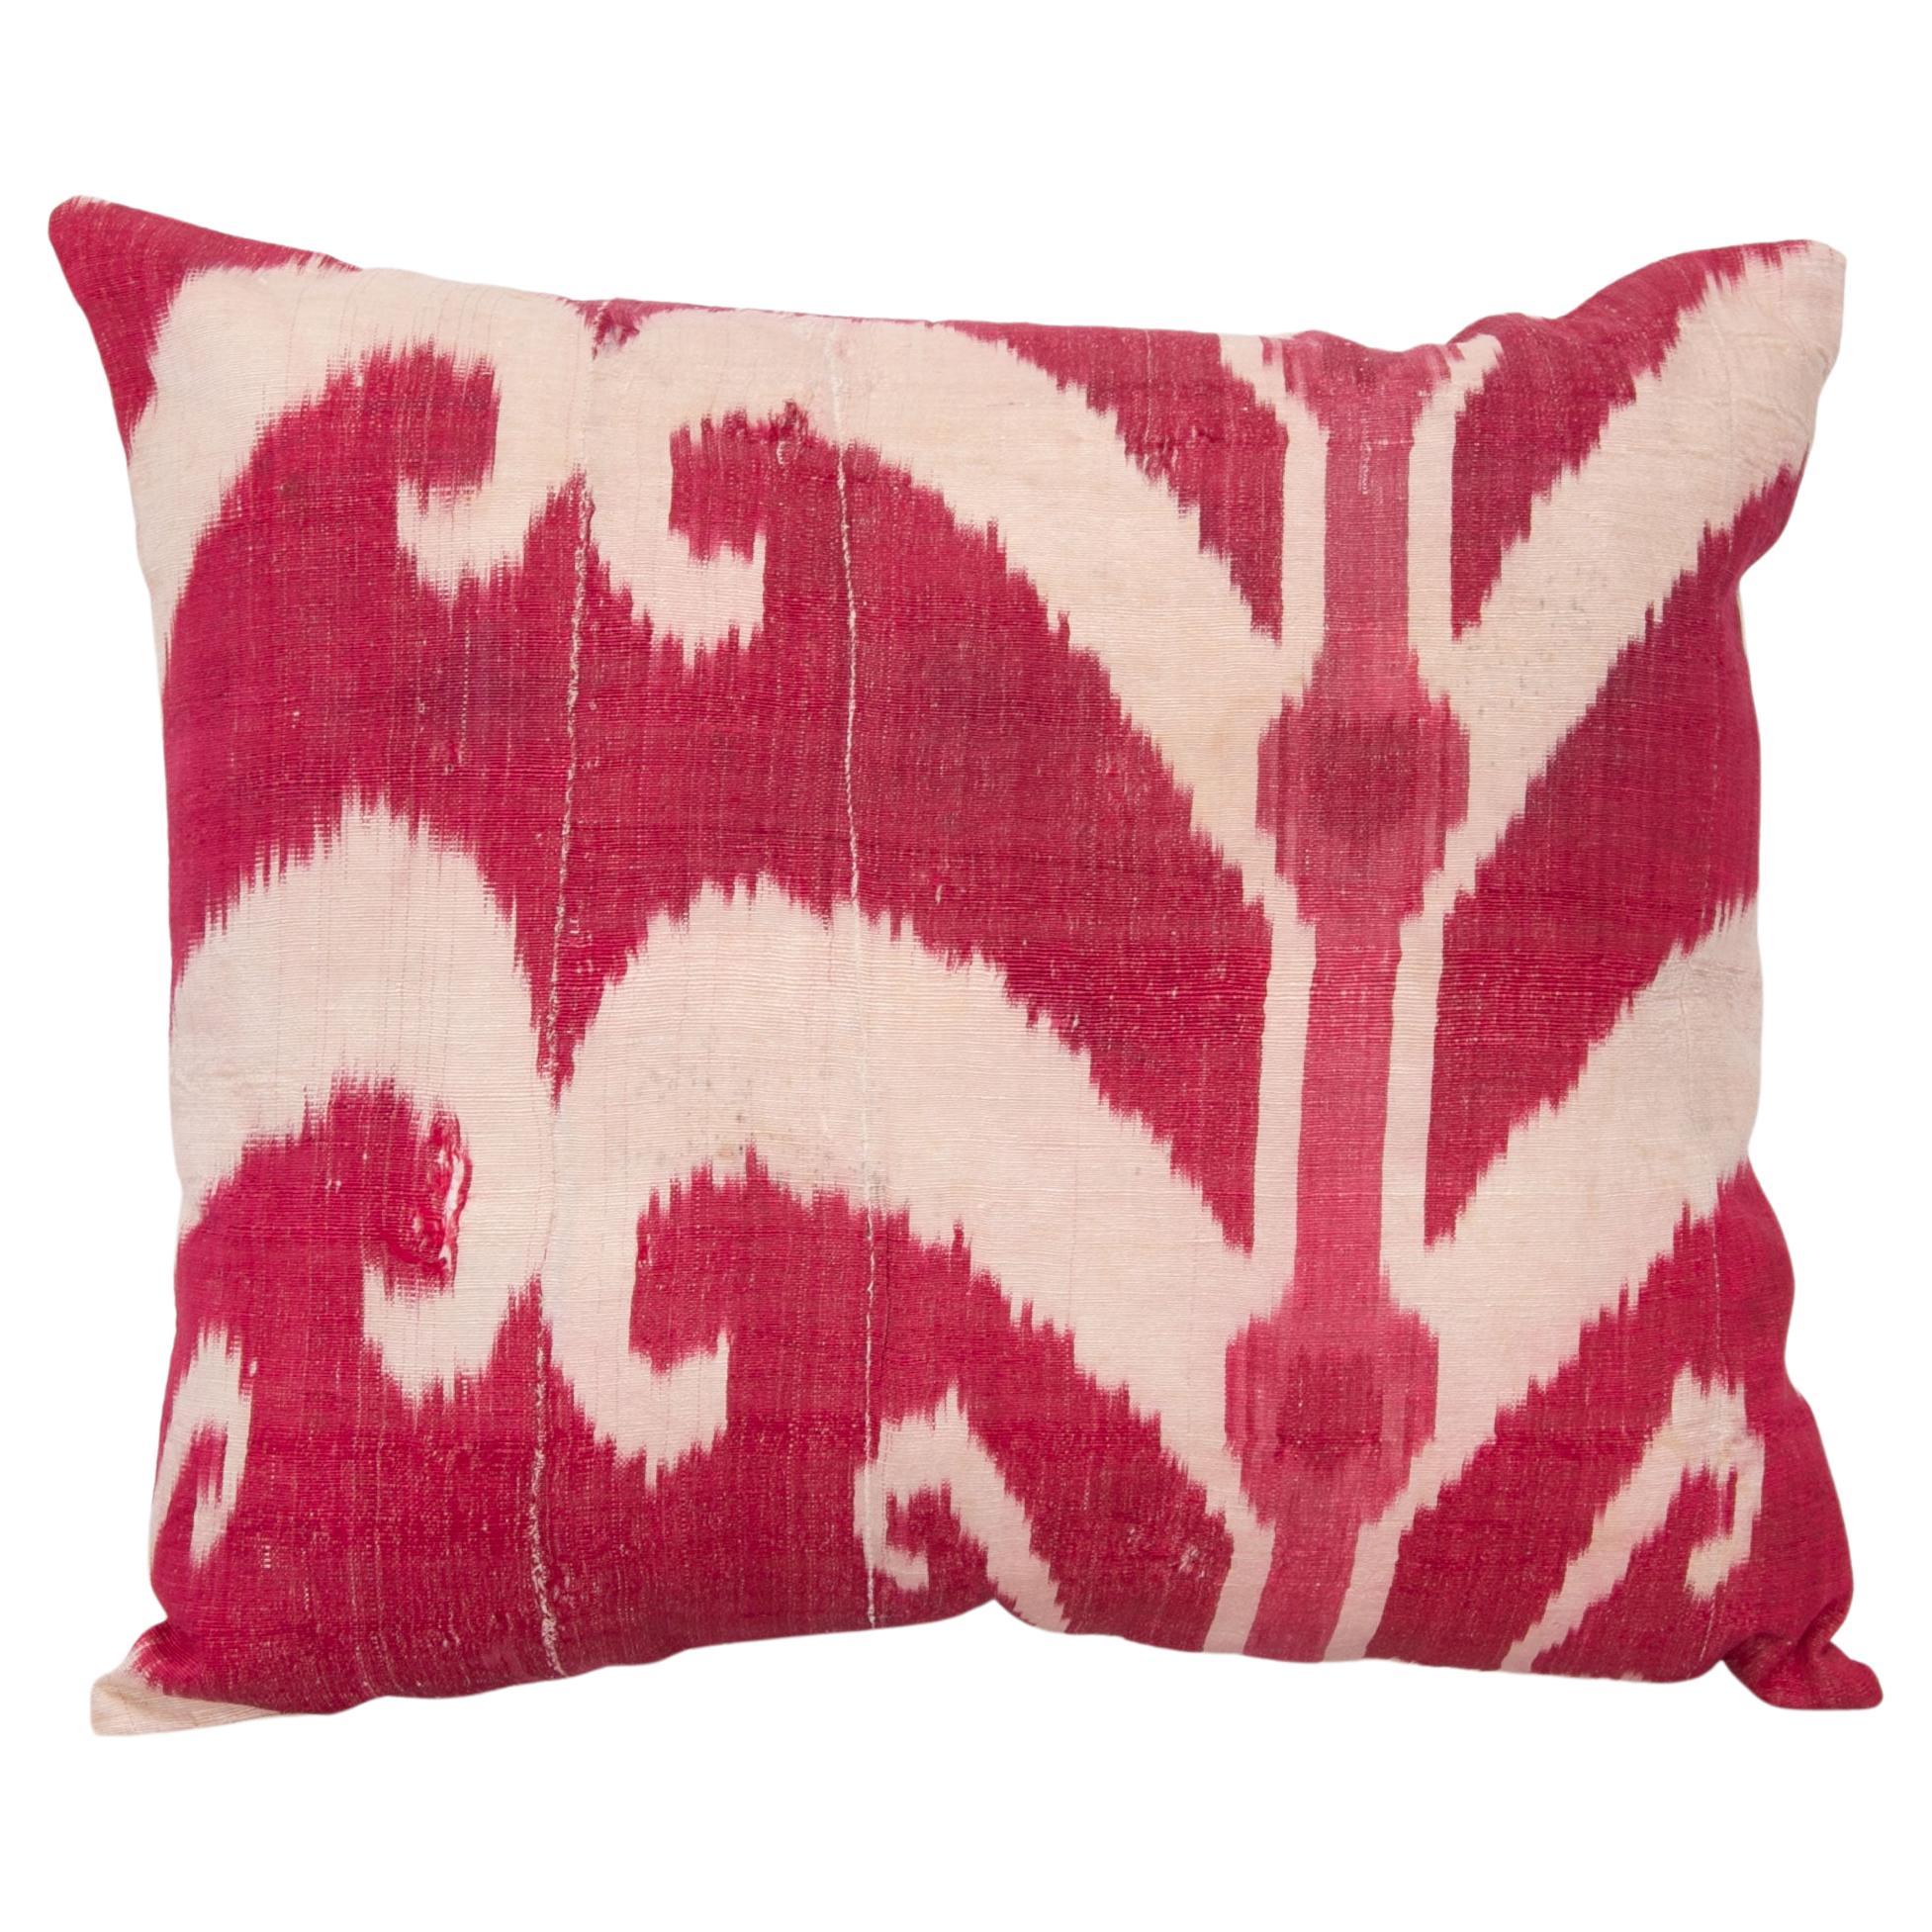 Ikat Pillow Cover Made from an Antique Silk and Cotton Ikat For Sale